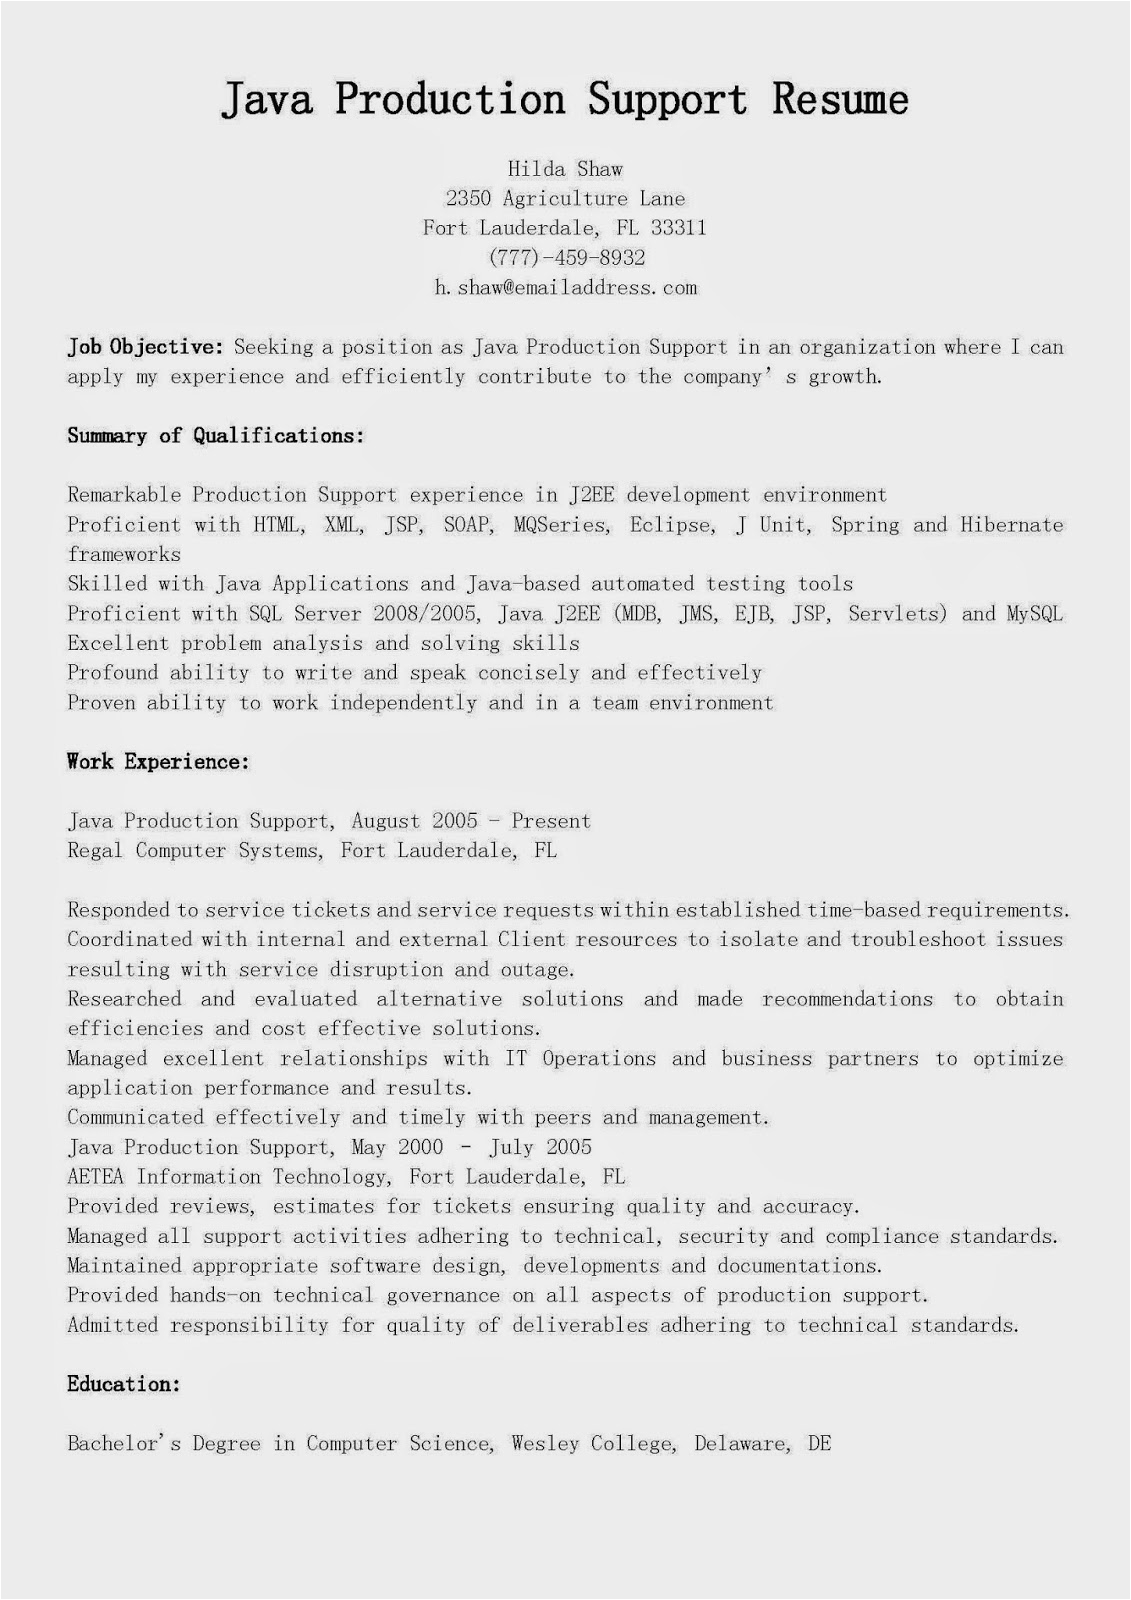 Sample Resume for Mainframe Production Support Resume Samples Java Production Support Resume Sample